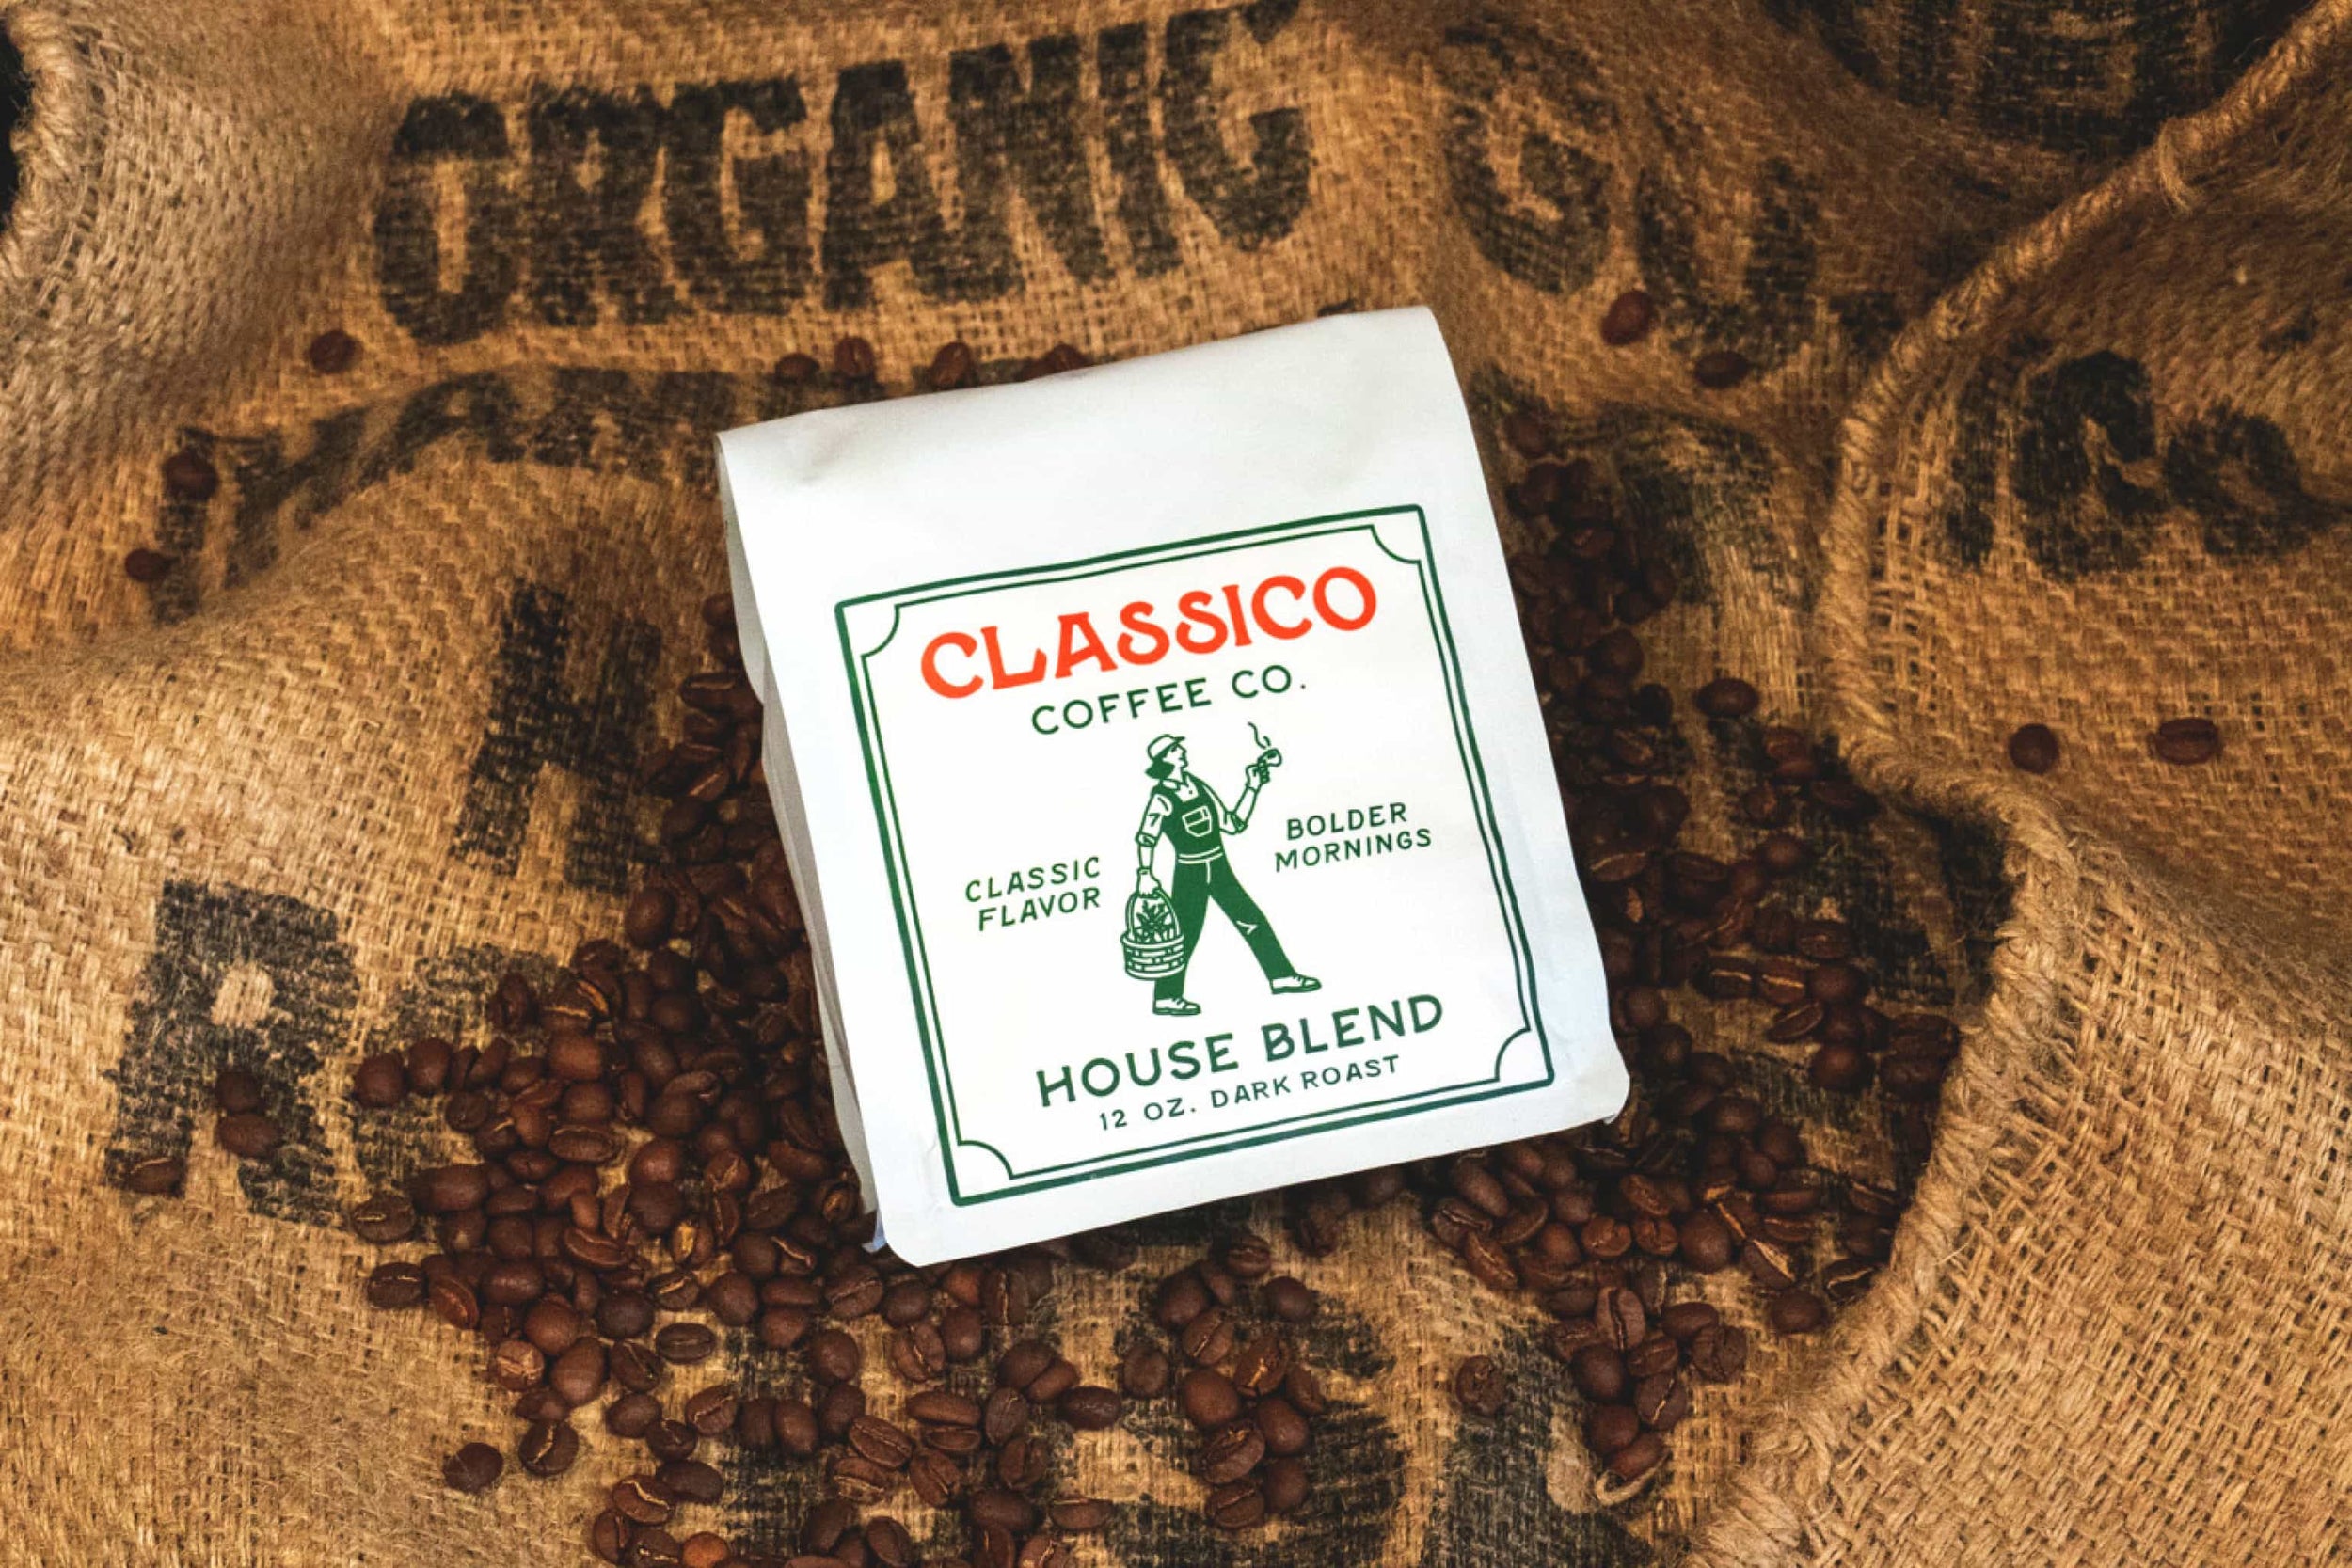 A picture of classico coffee on a darker background